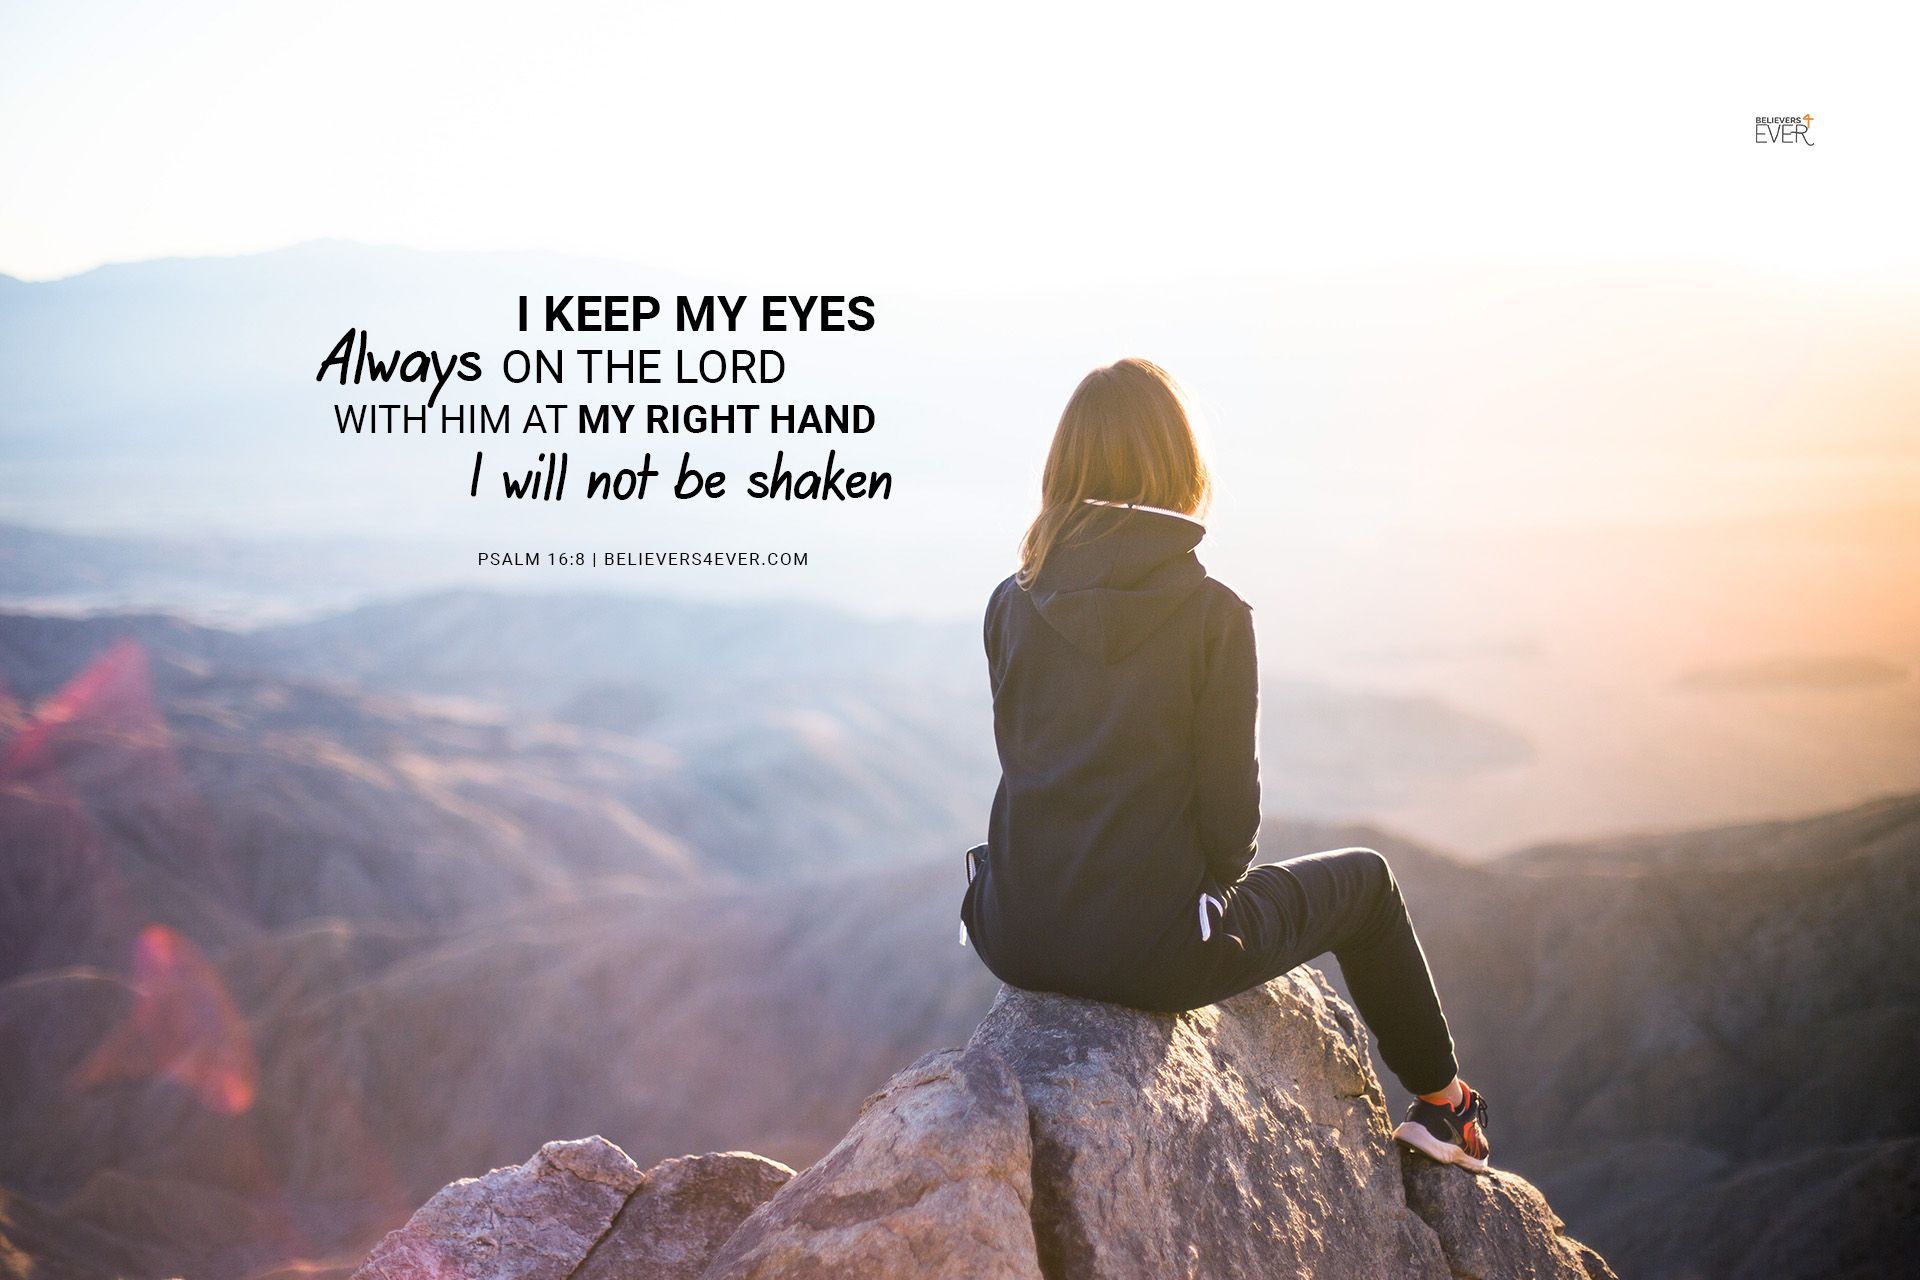 I keep my eyes always on the Lord. Christian wallpaper, Christian